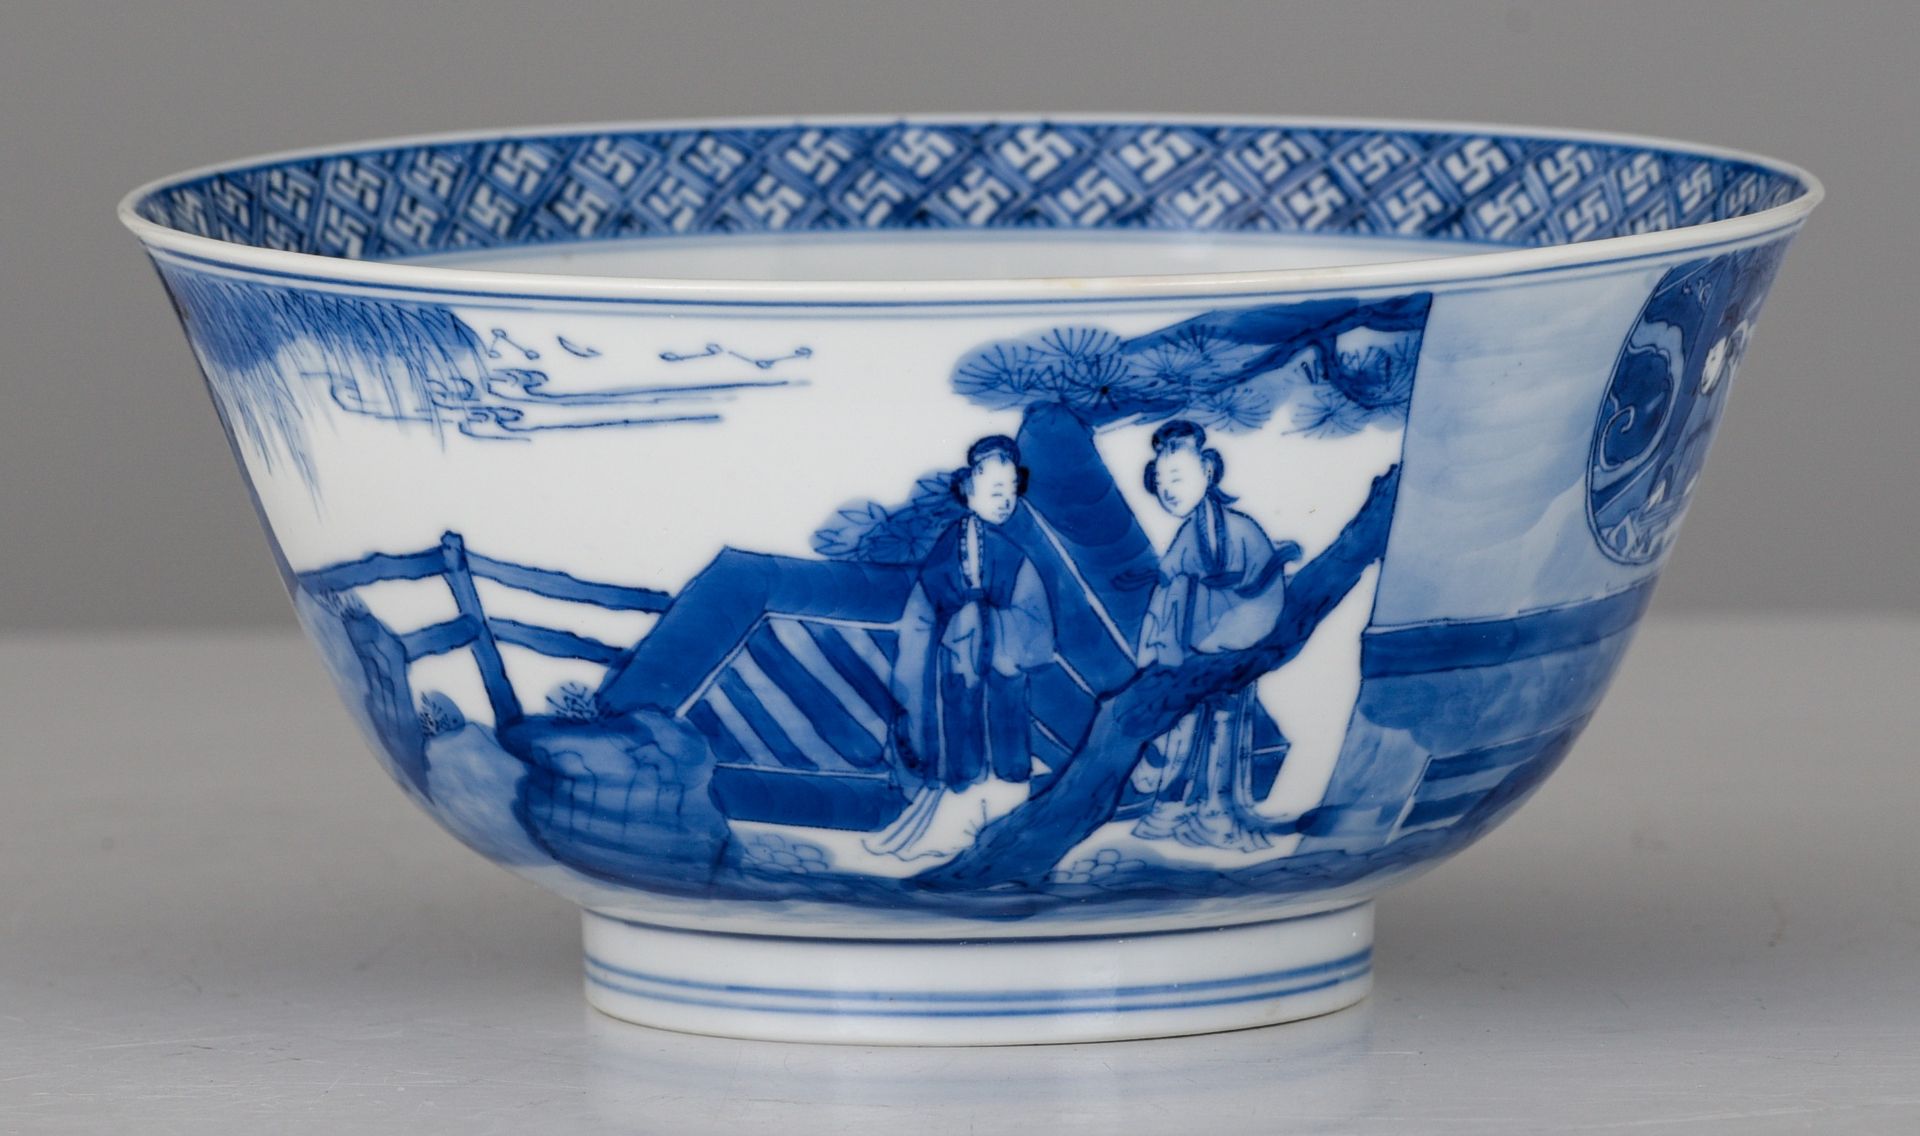 A Chinese blue and white figural bowl, Kangxi mark and of the period, H 7,5 - dia. 16 cm - Image 4 of 7